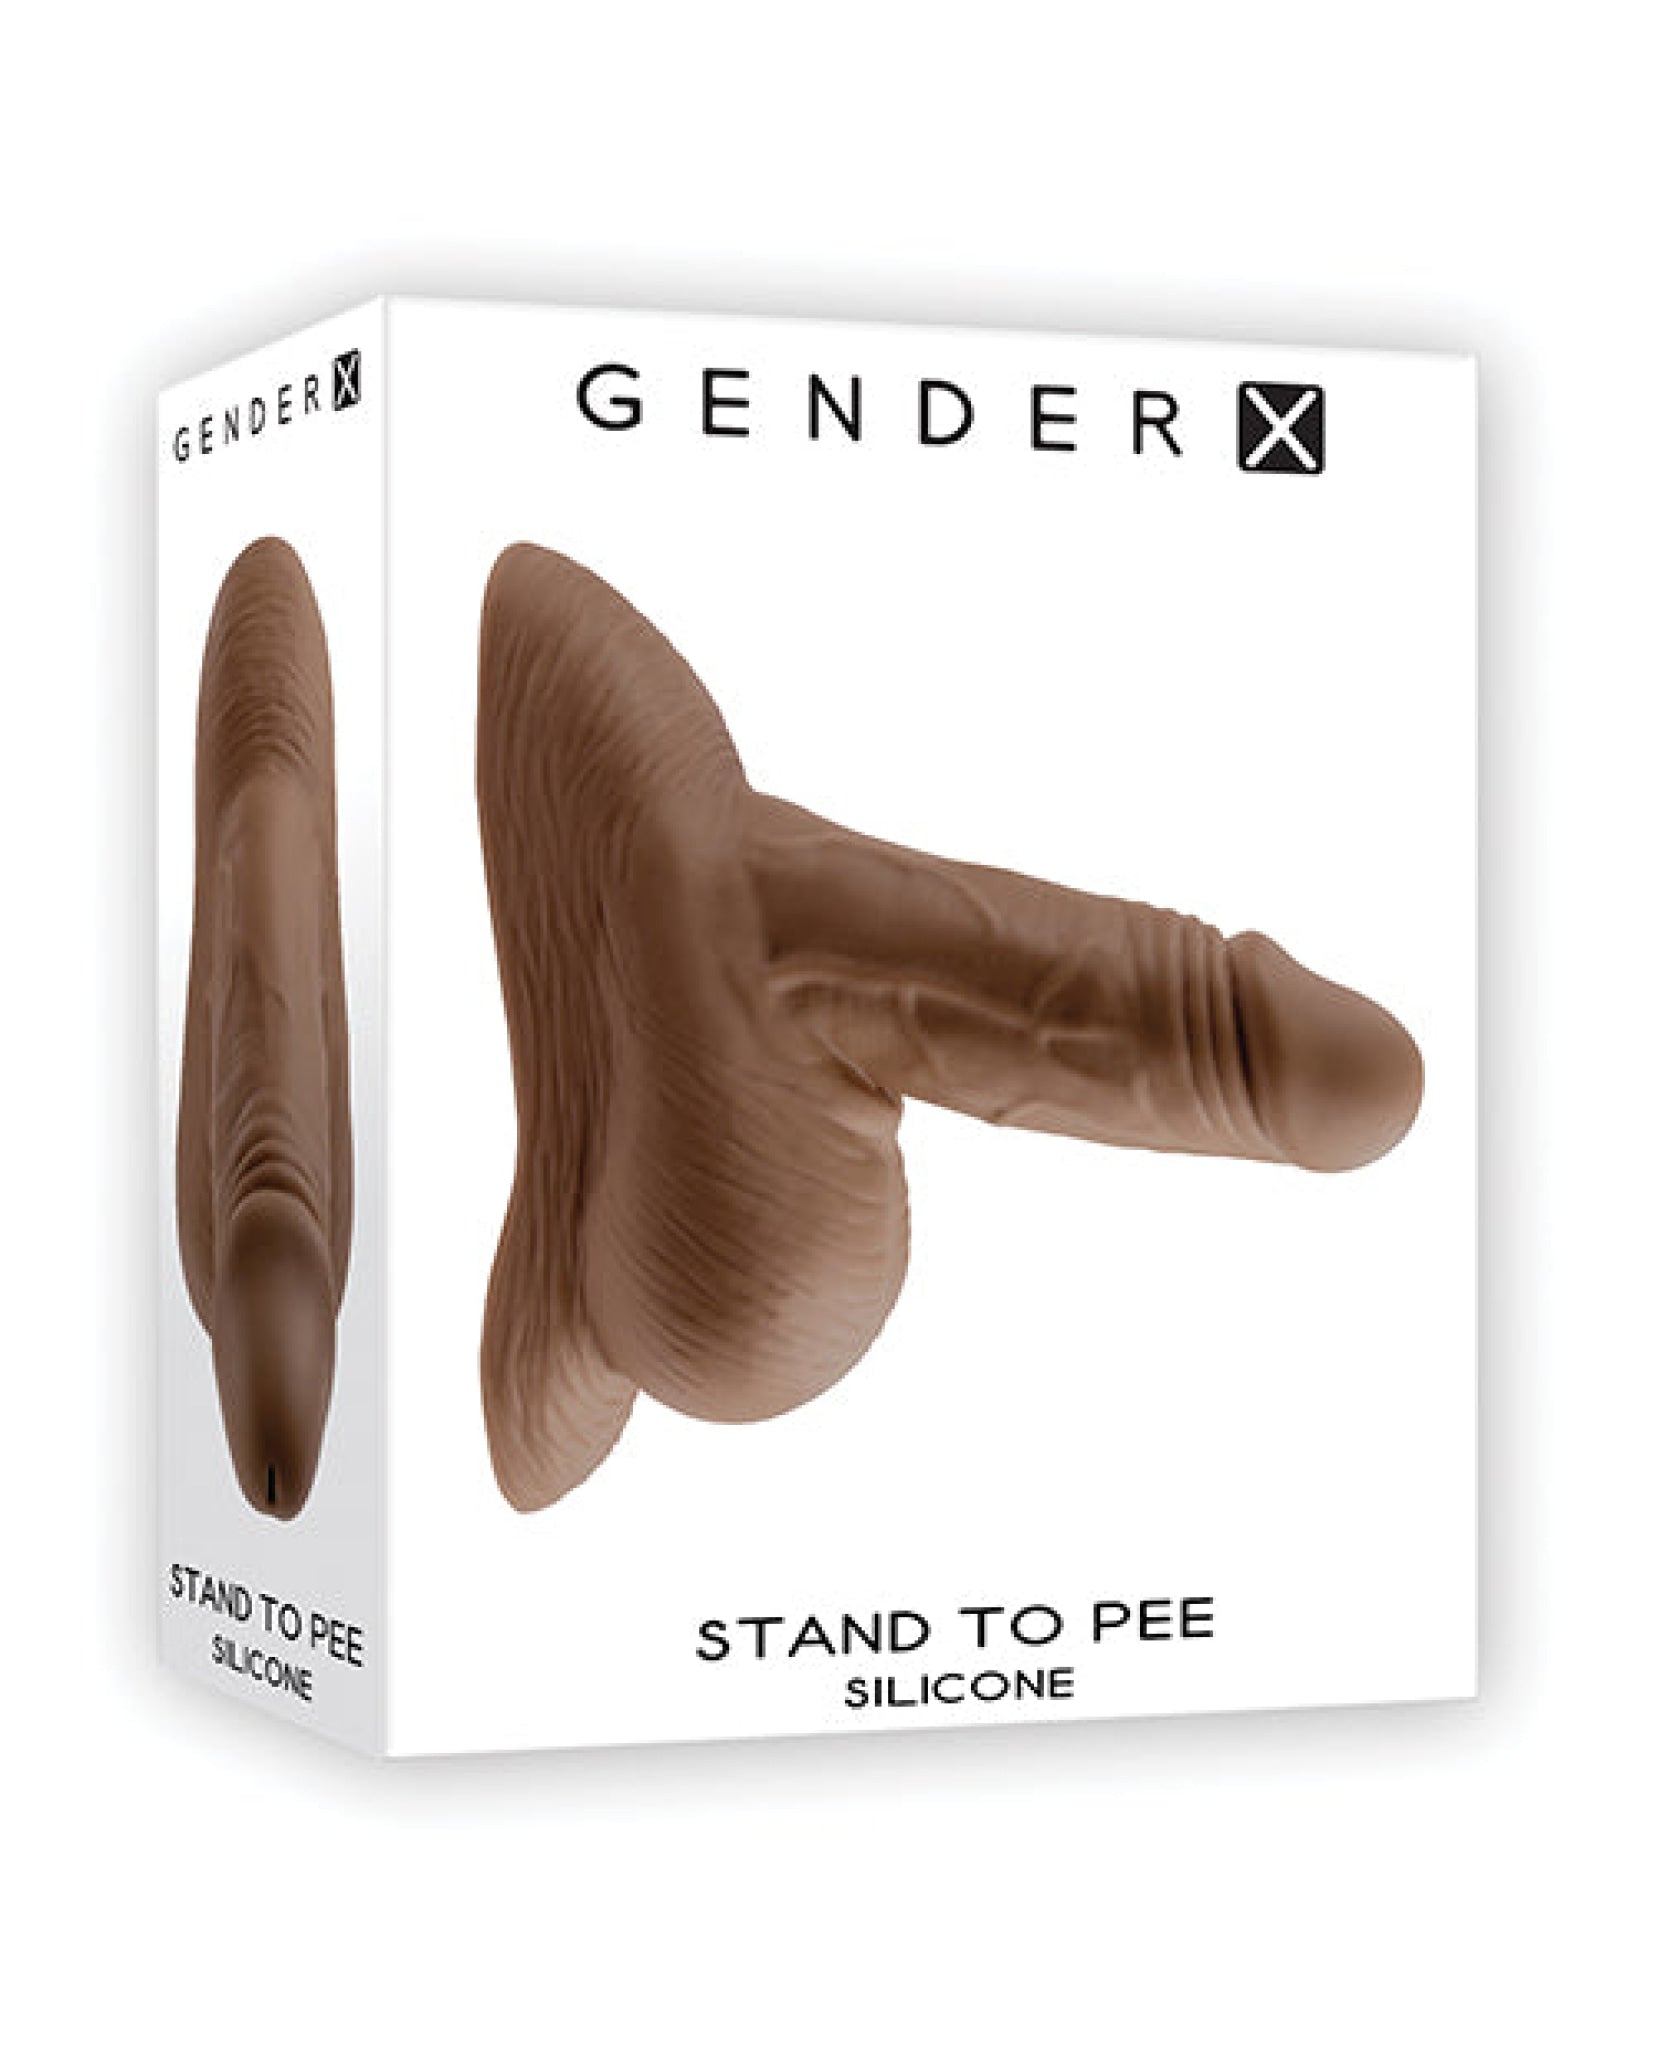 Gender X Silicone Stand To Pee Gender X